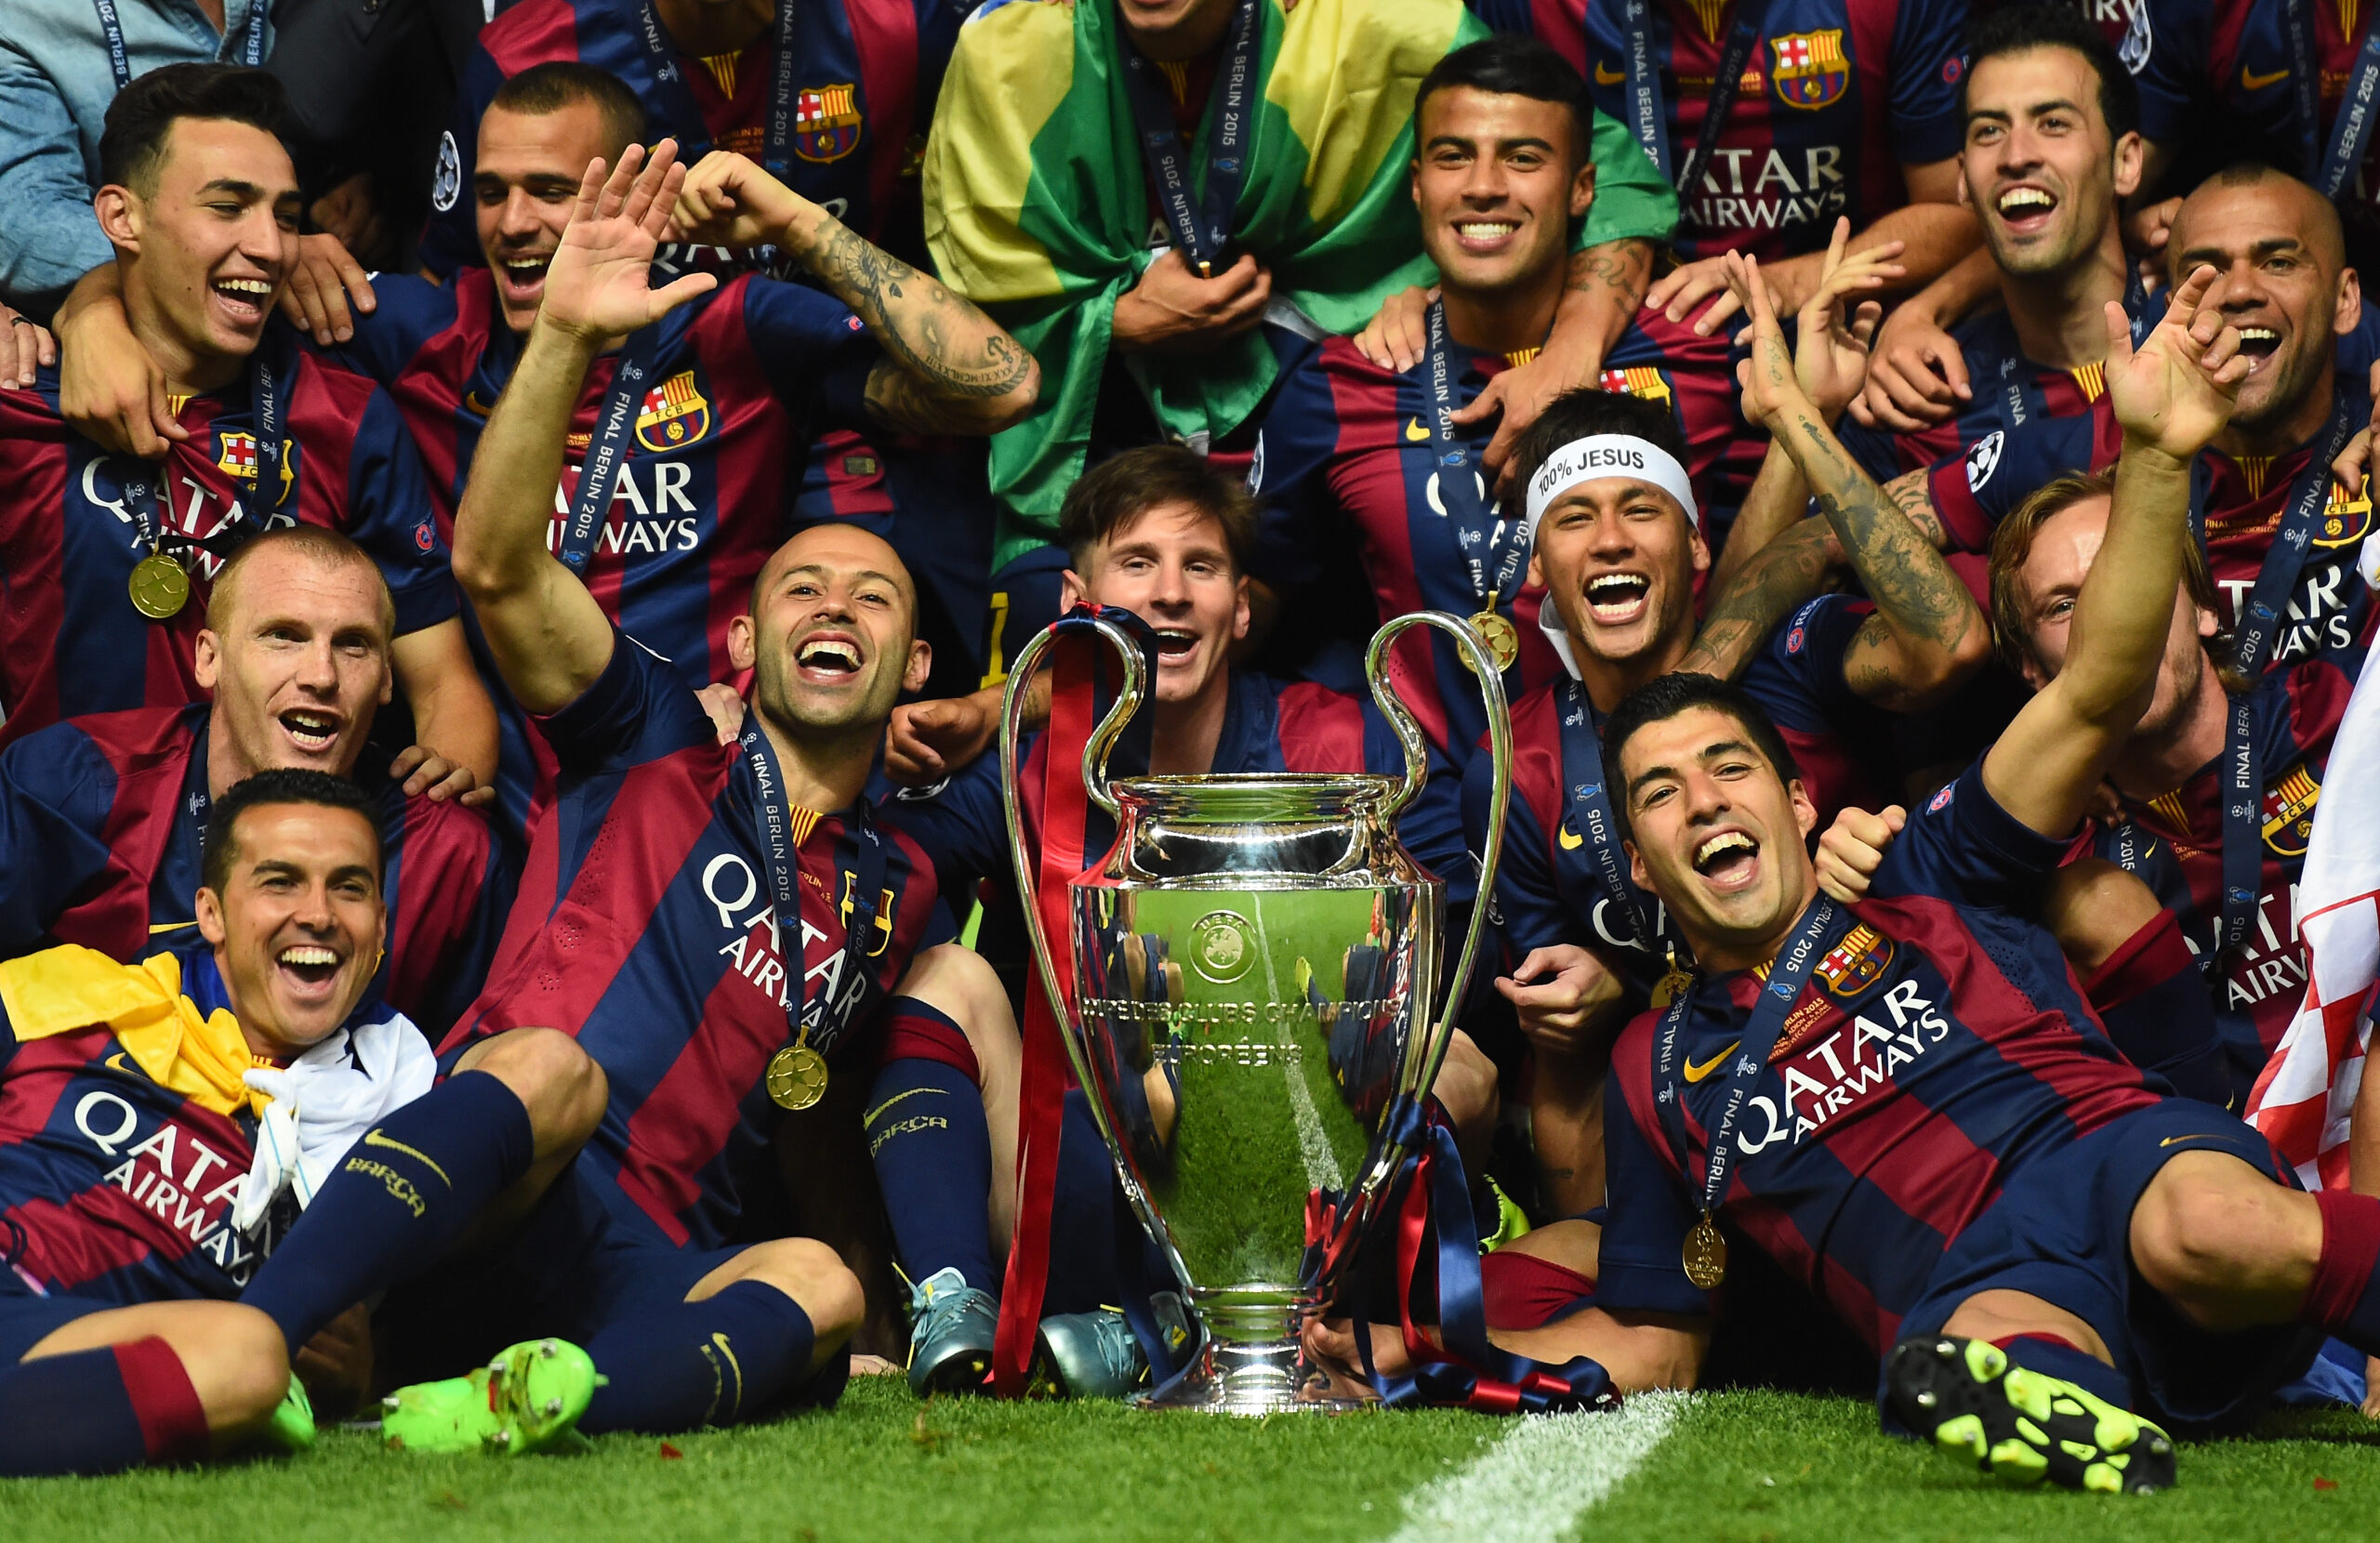 Barcelona and Juventus are two clubs may have affected UEFA's recent decision.